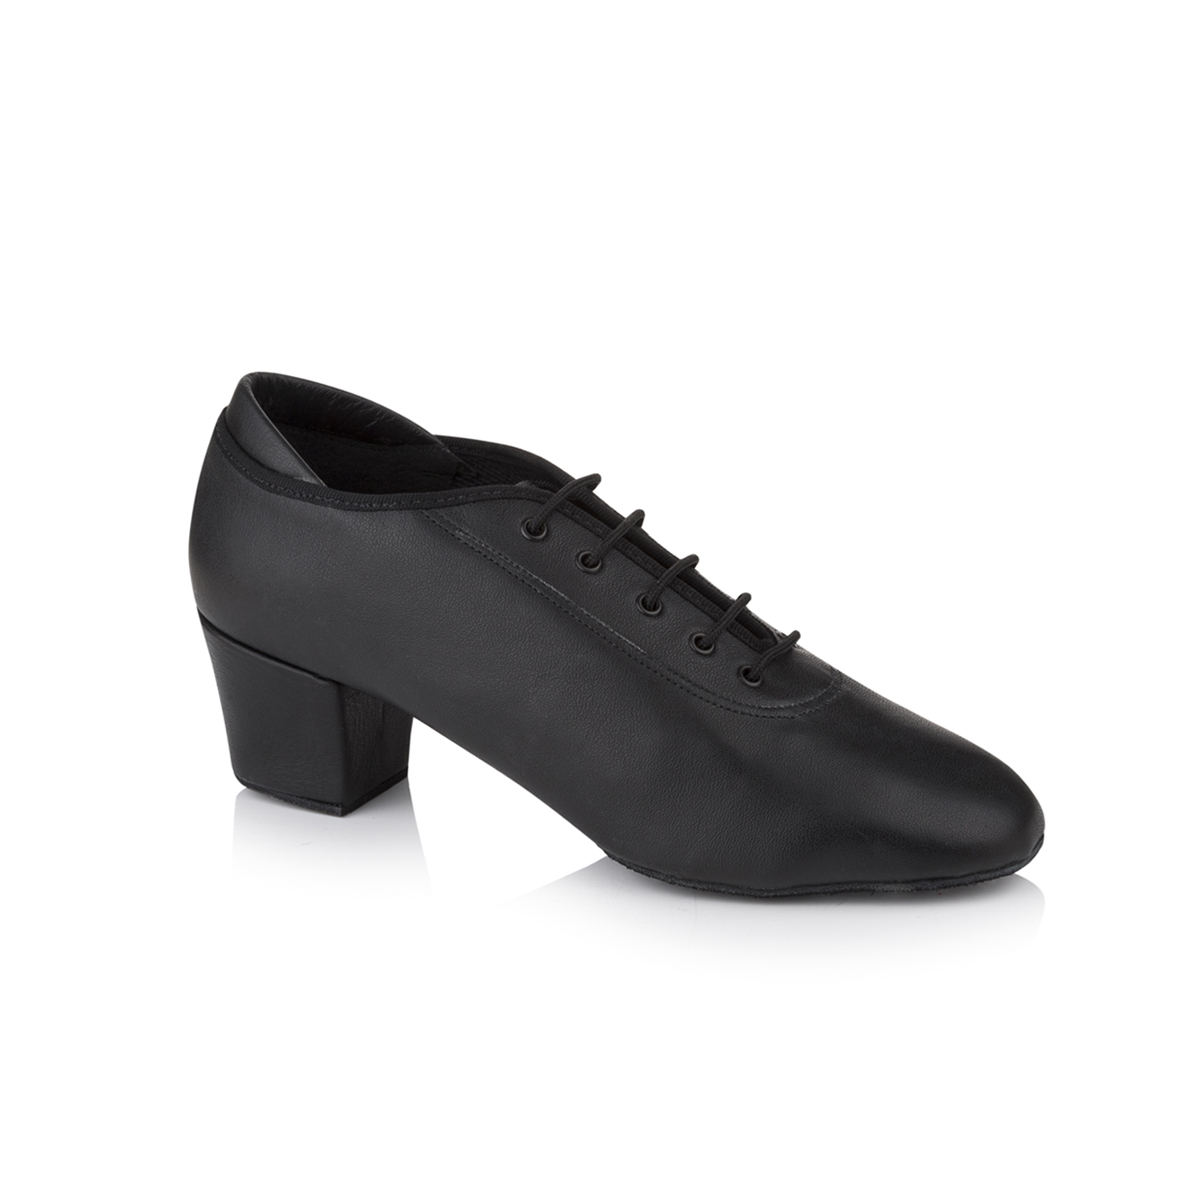 FREED OF LONDON - Freed Of London Latin Competition Dance Shoes Marco